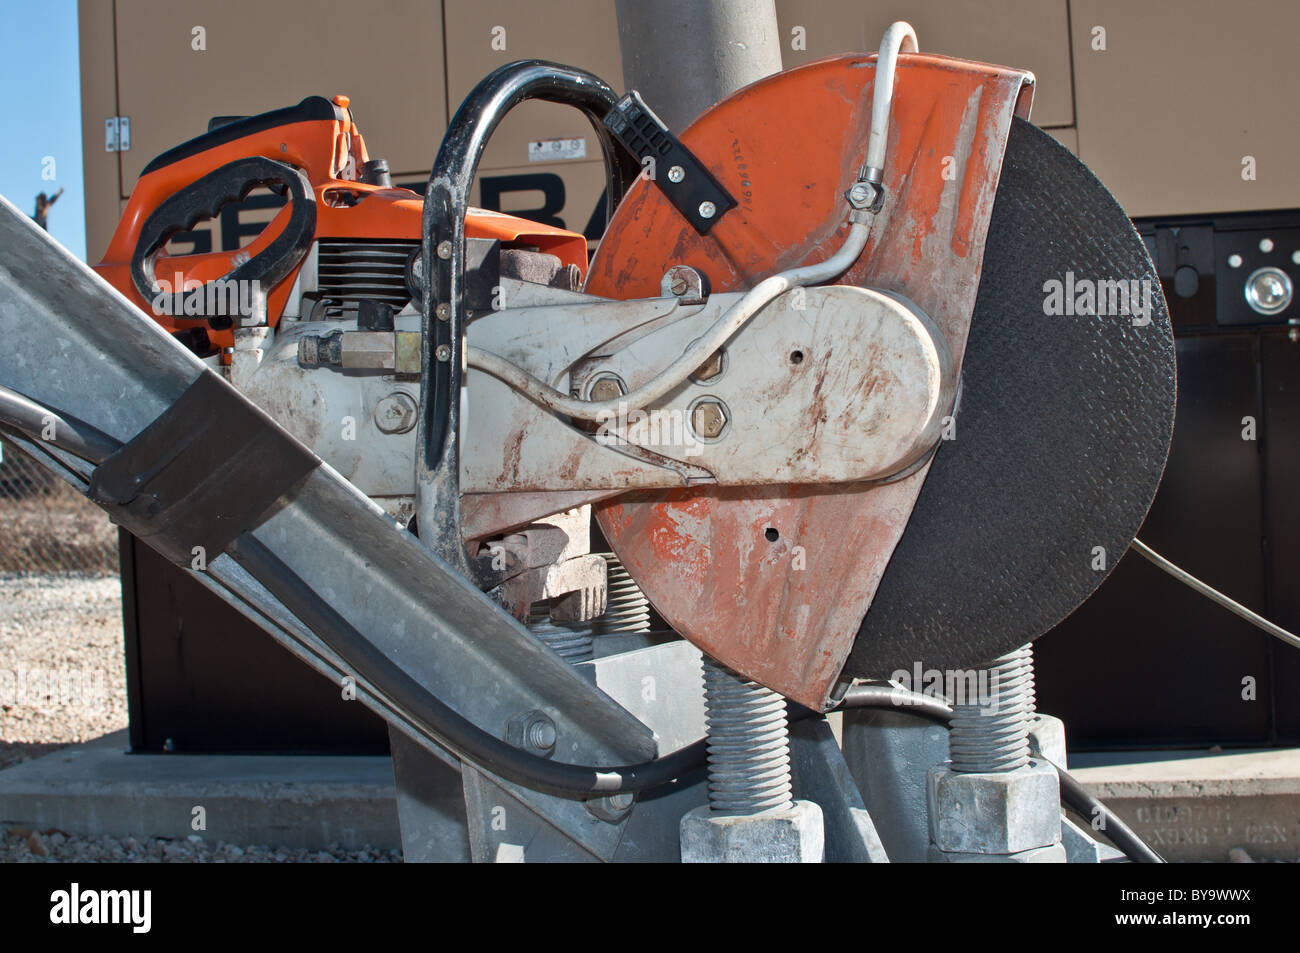 A Stihl Demolition saw sitting on a Ford truck bed. Stock Photo